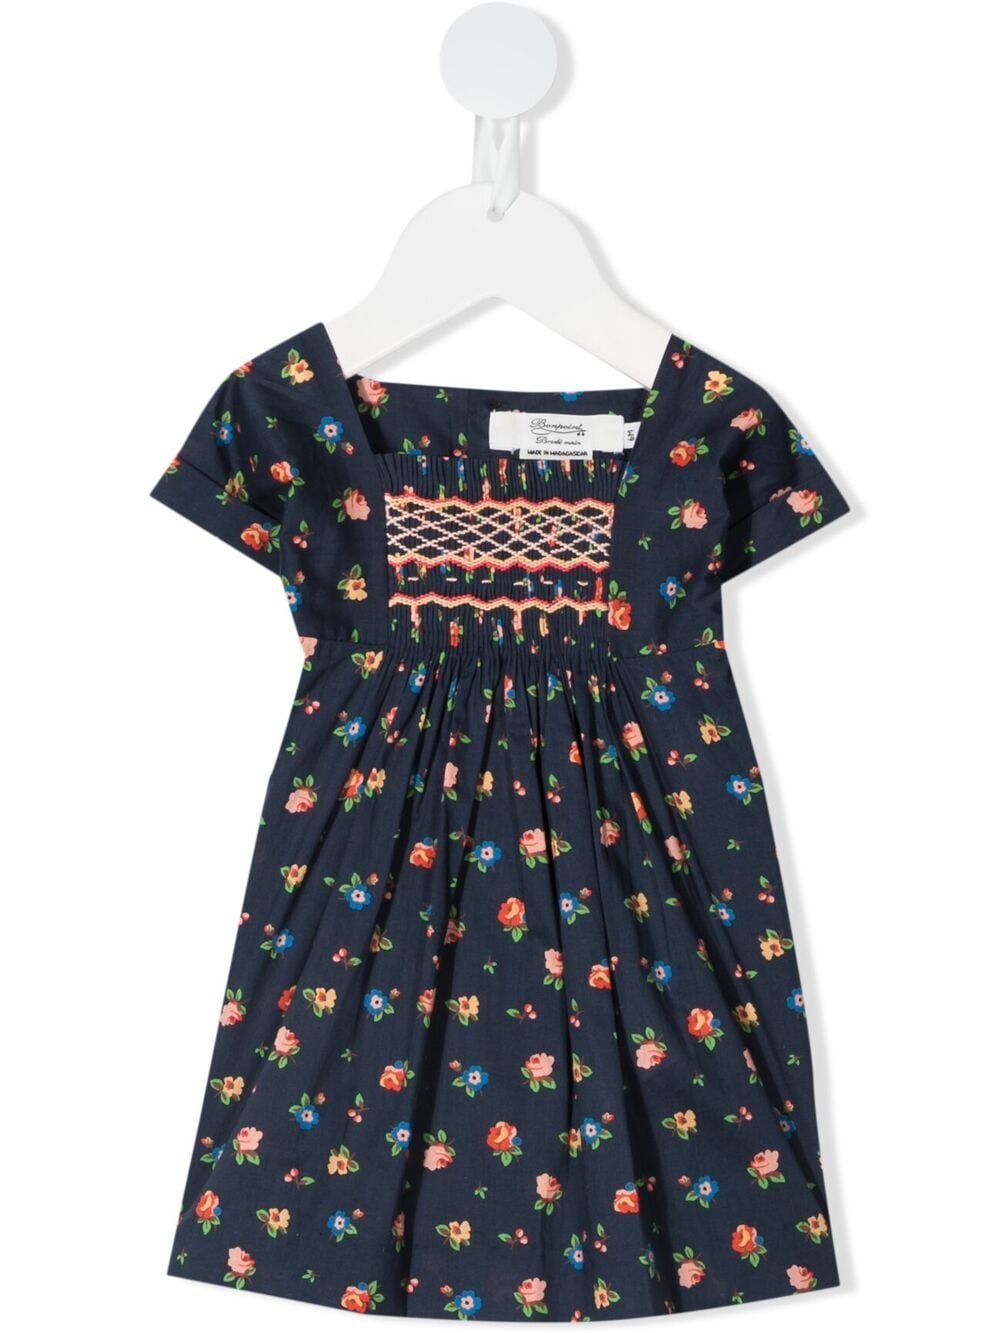 BONPOINT FLORAL EMBROIDERED DRESS